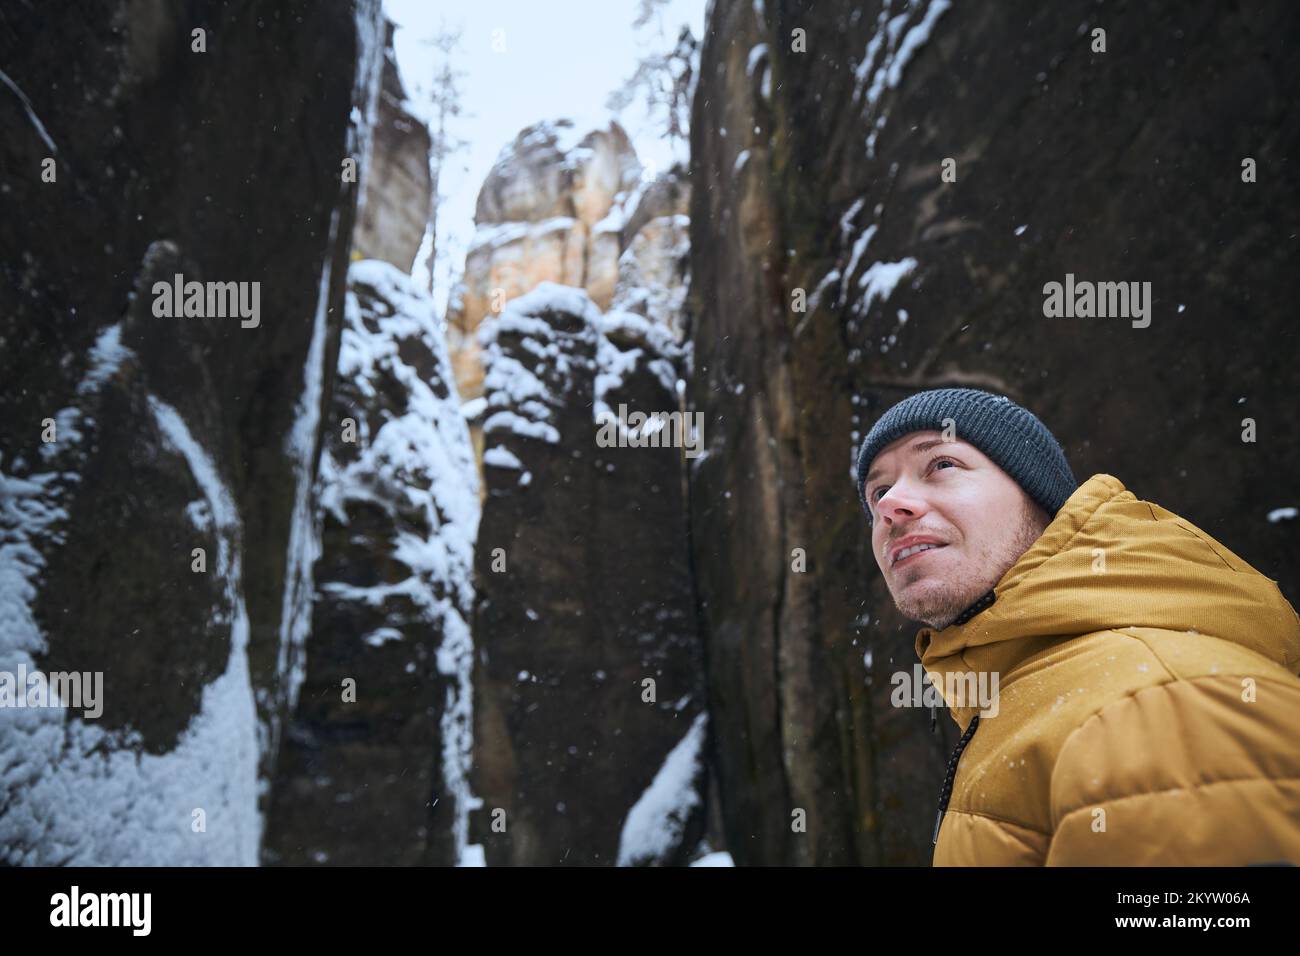 Portrat of man in the middle of snowy rocks during winter frosty day. Stock Photo